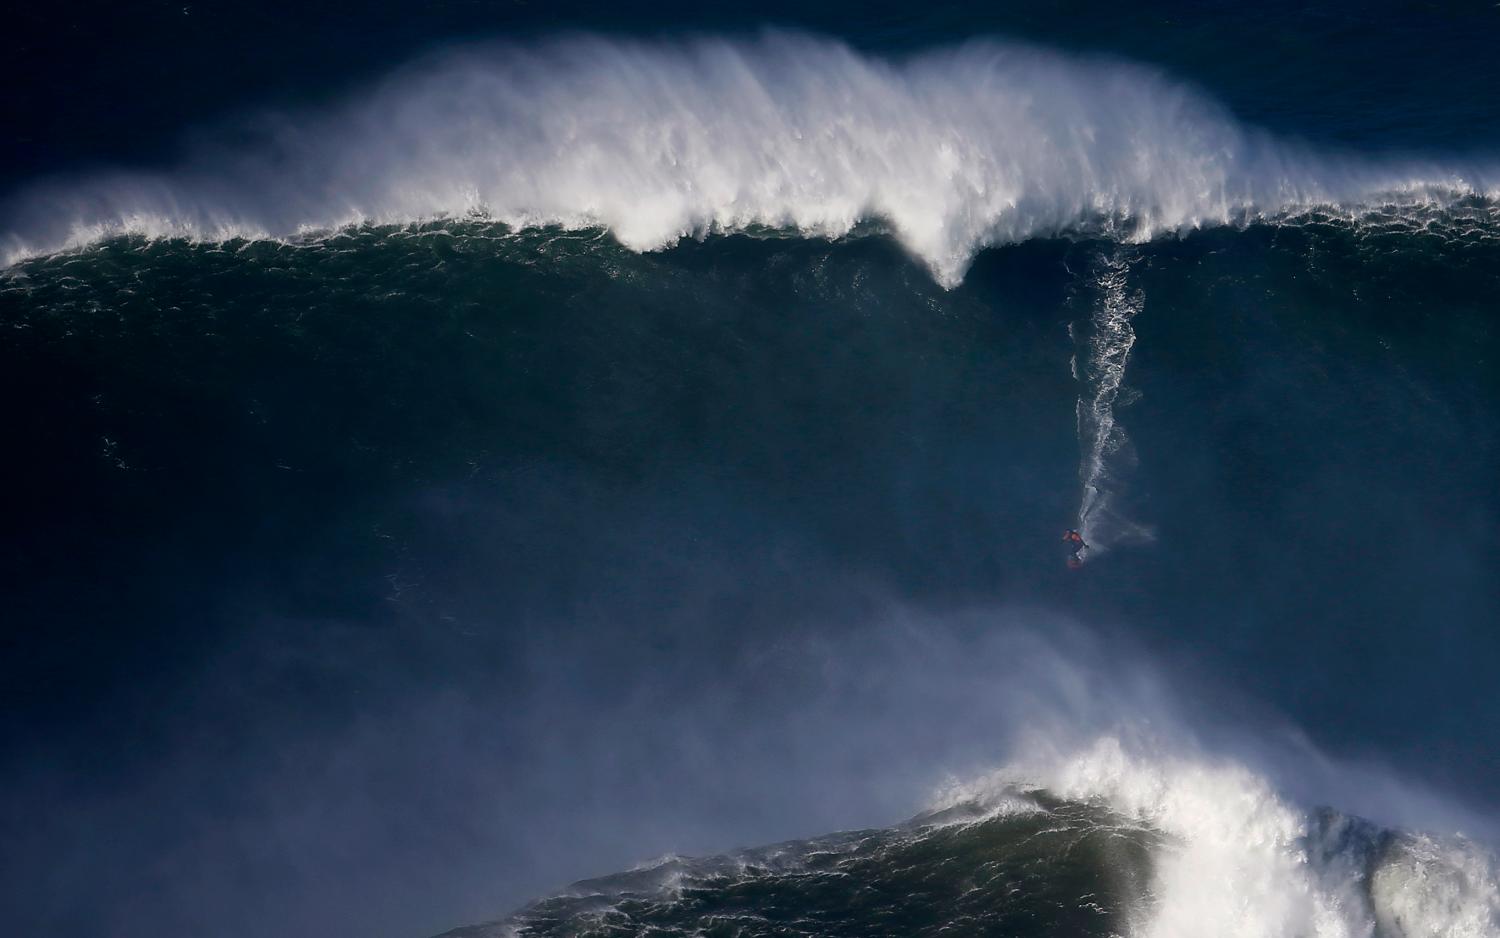 A surfer drops in on a large wave at Praia do Norte, in Nazare